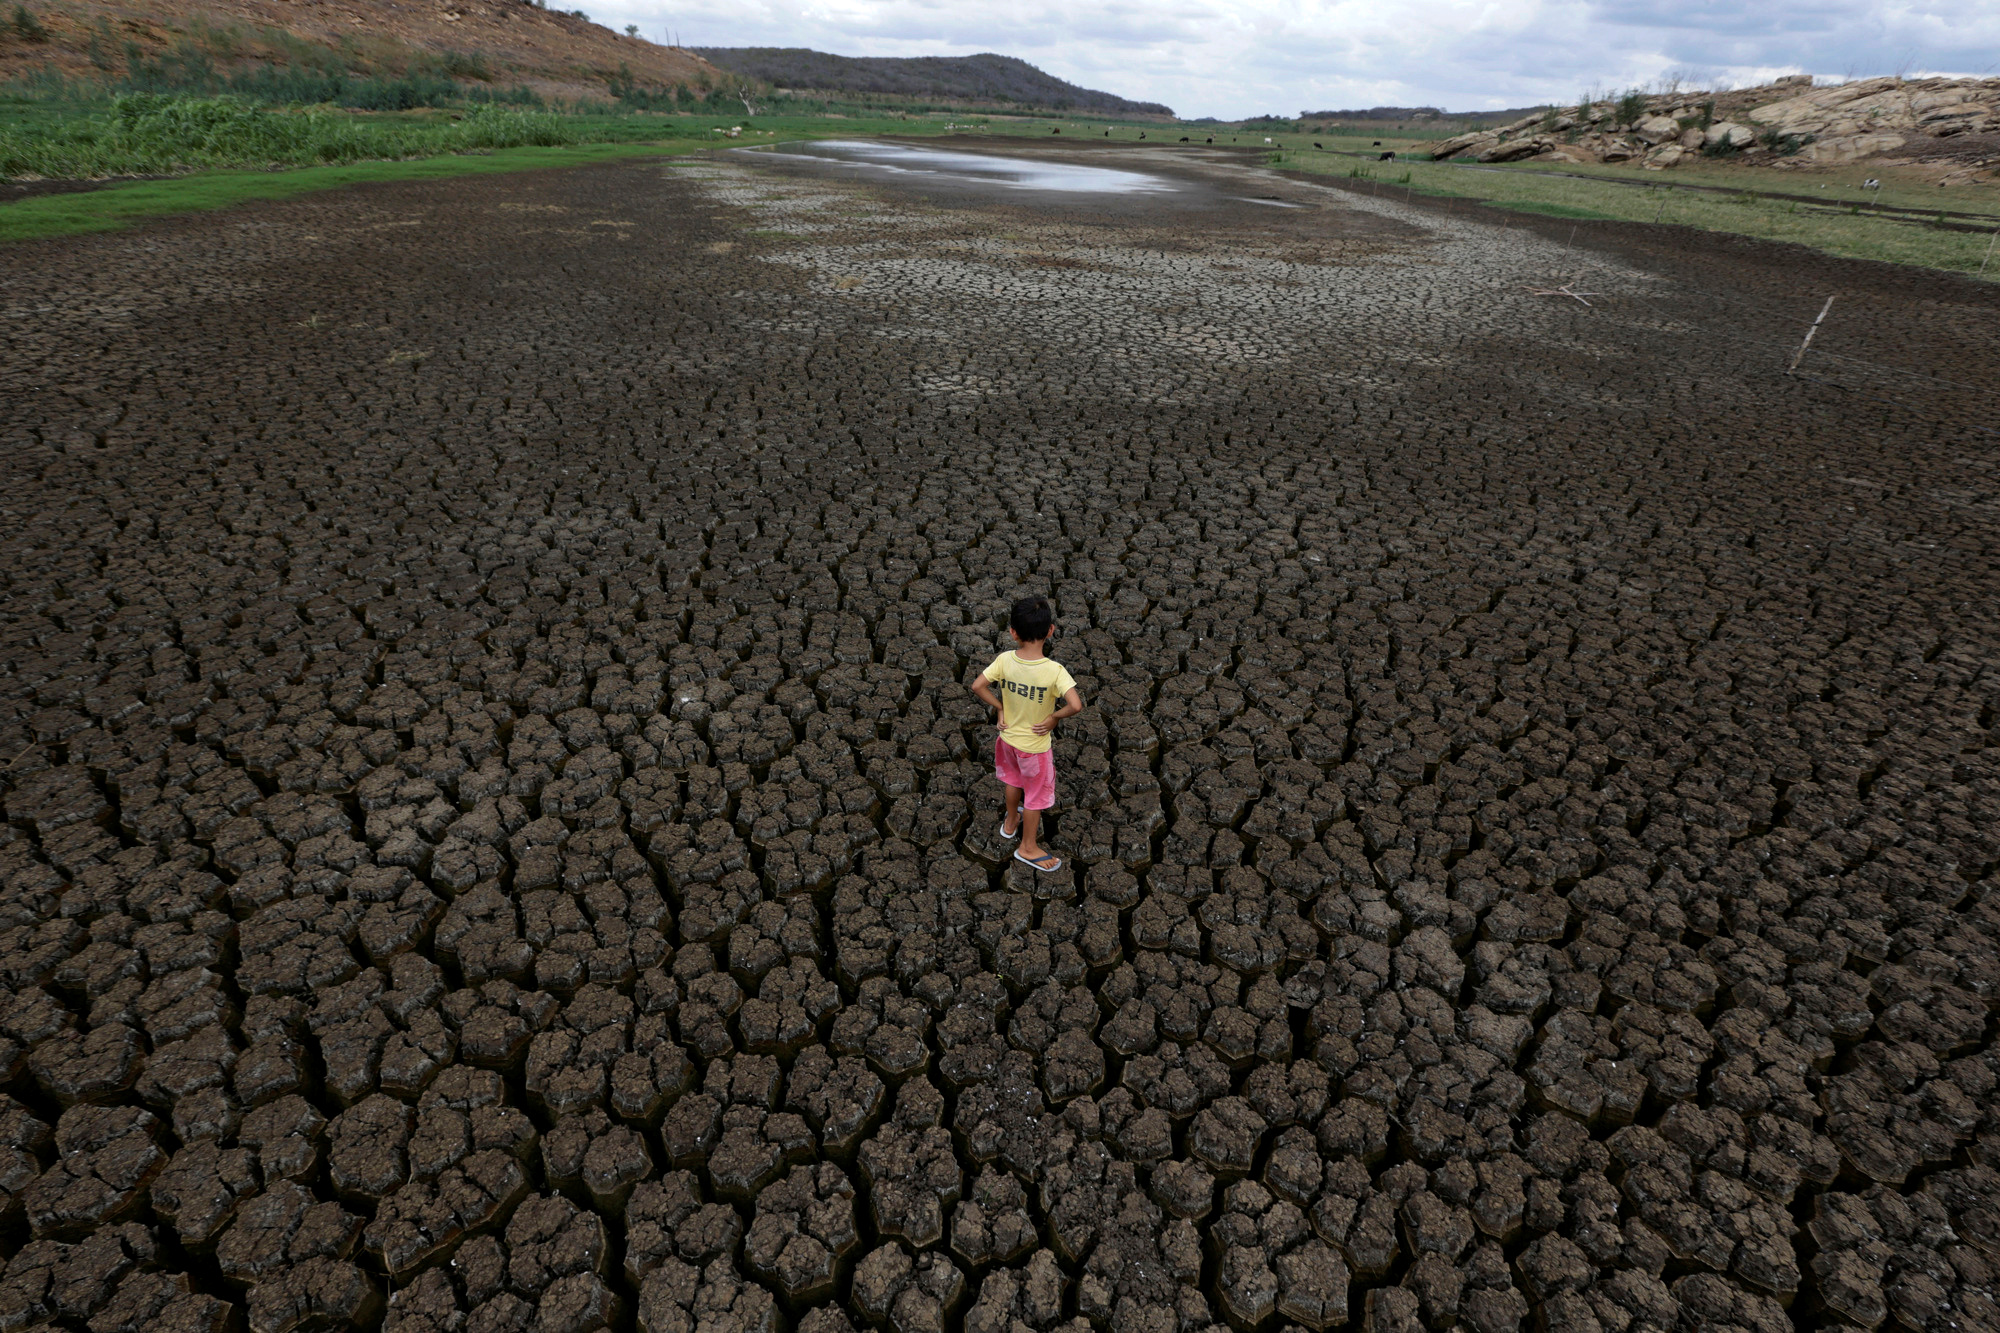 The Wider Image: Brazil's race to save drought-hit city